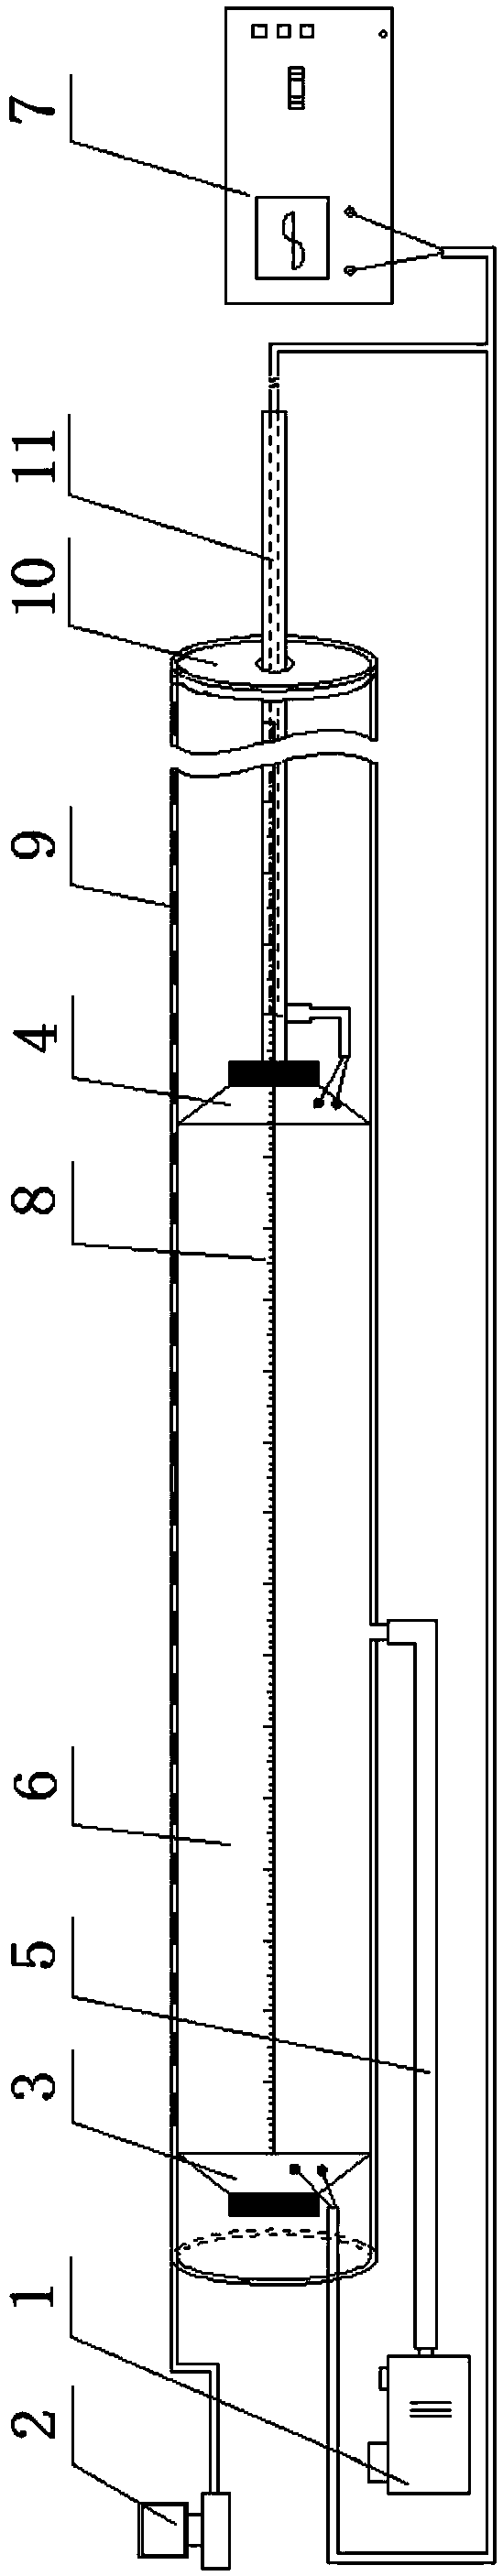 Gas standing wave determination experimental device